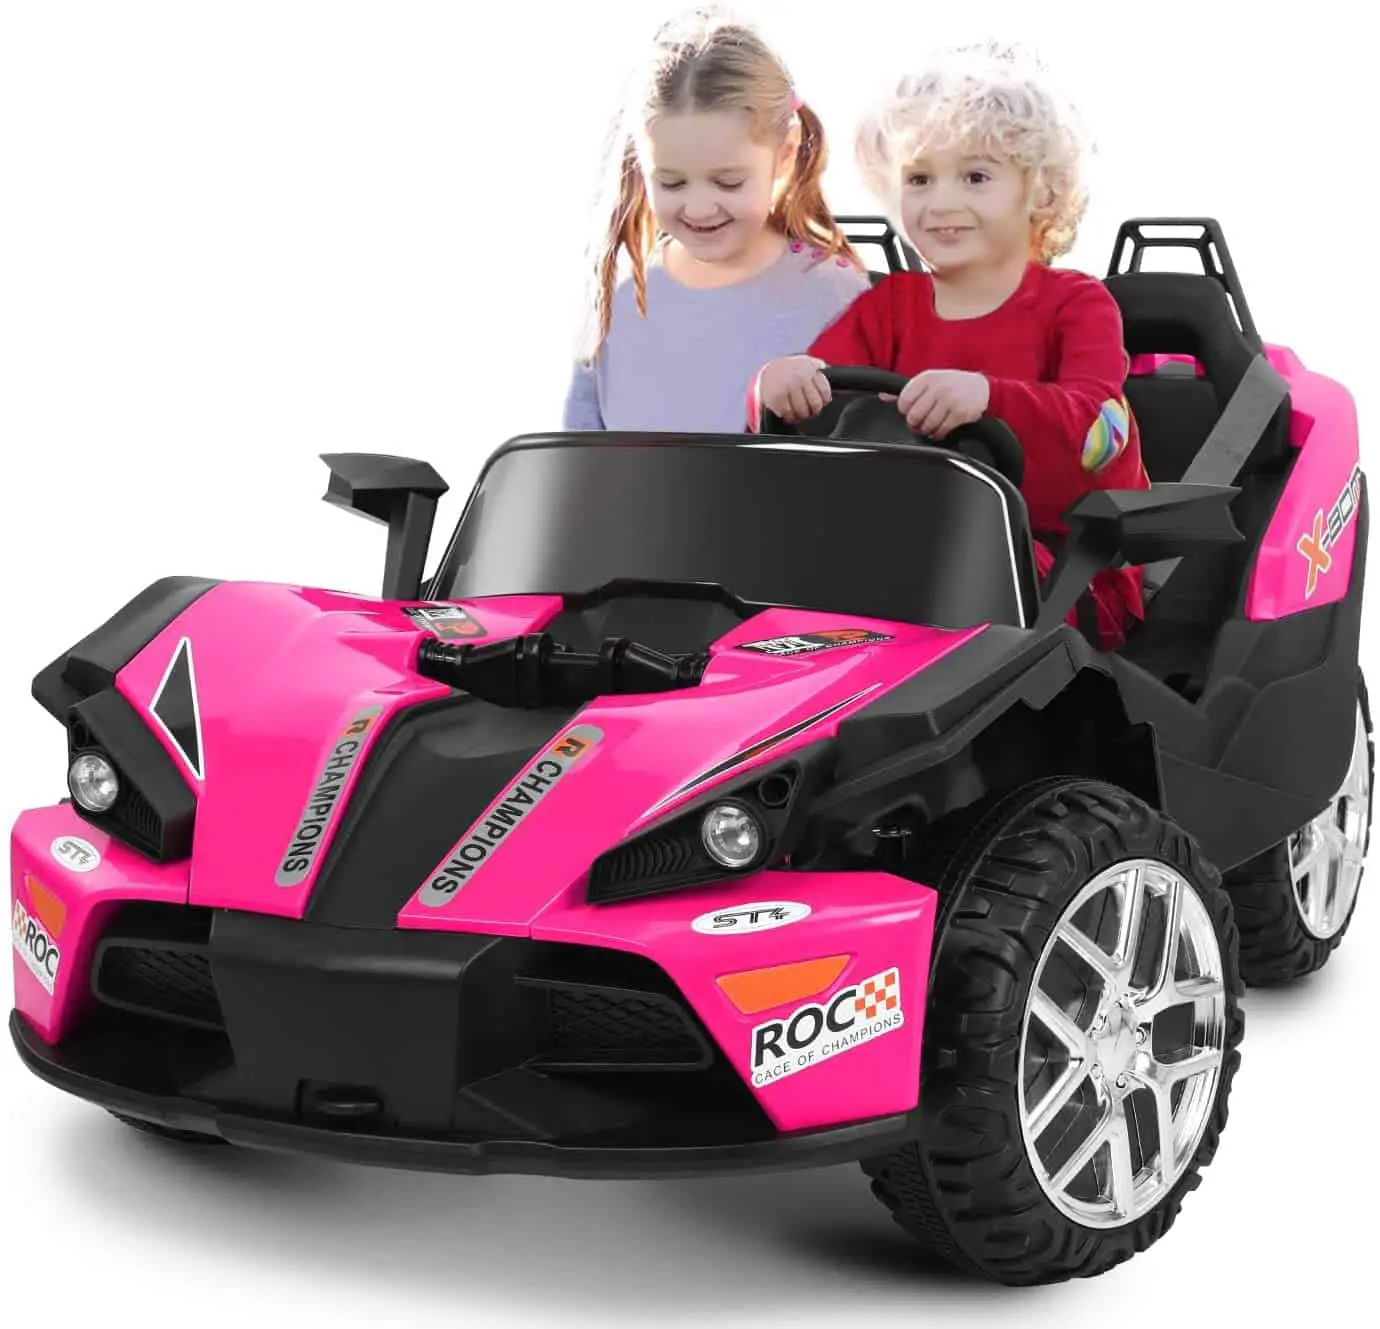 7 Best Power Wheels for 2-Year-Olds